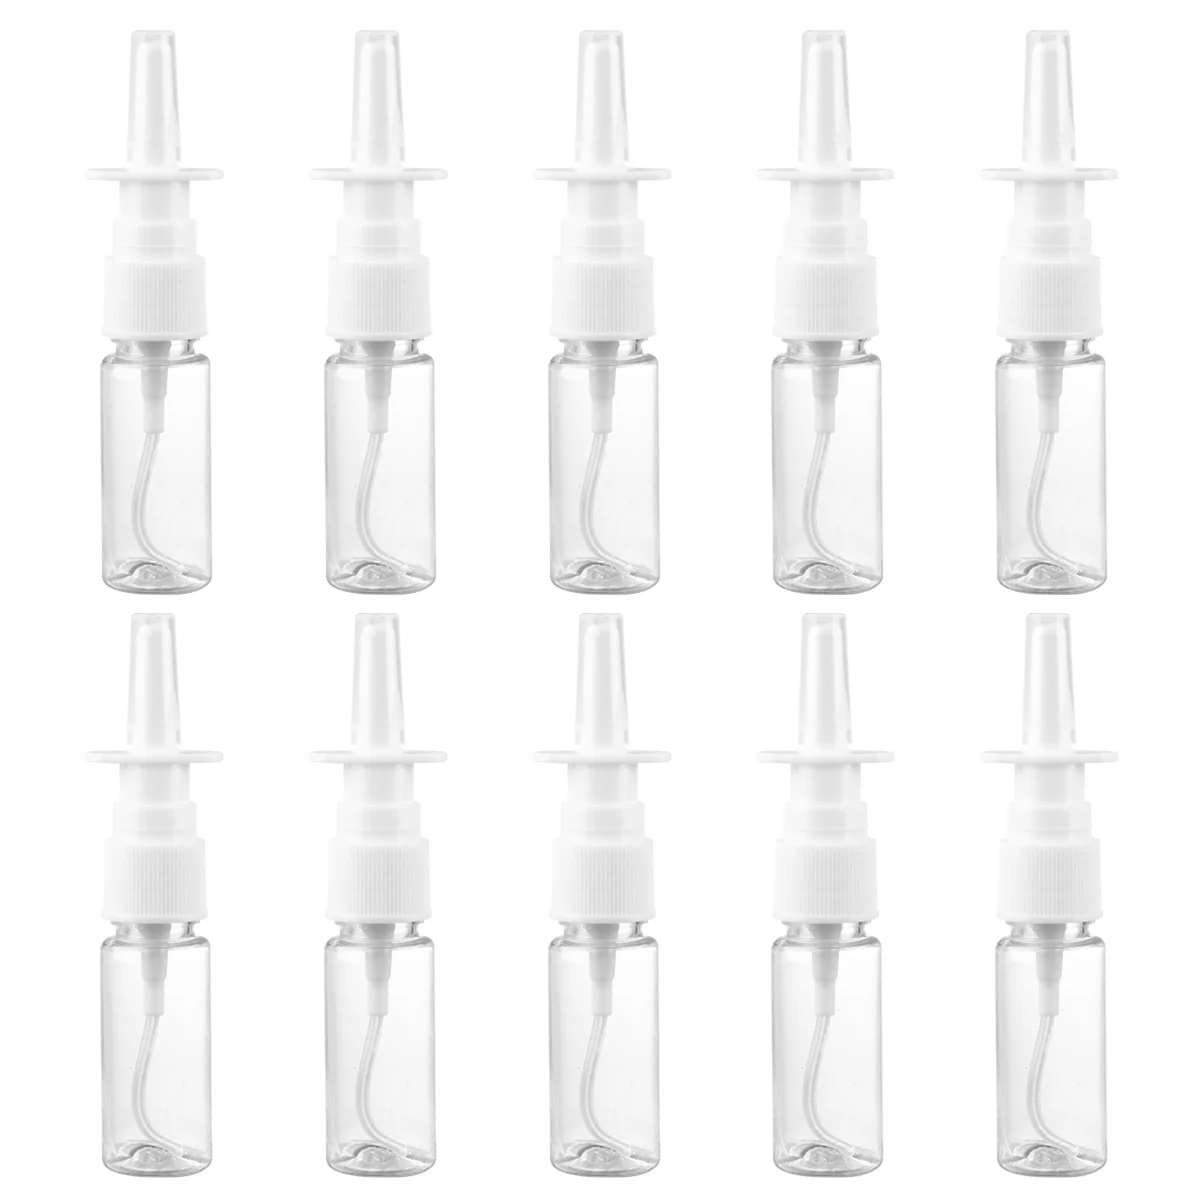 

20 Empty Refillable Nasal Spray Bottle Container Pot Fine Mist Nose Sprayers Atomizers Empty Bottles for Makeup Cosmetics